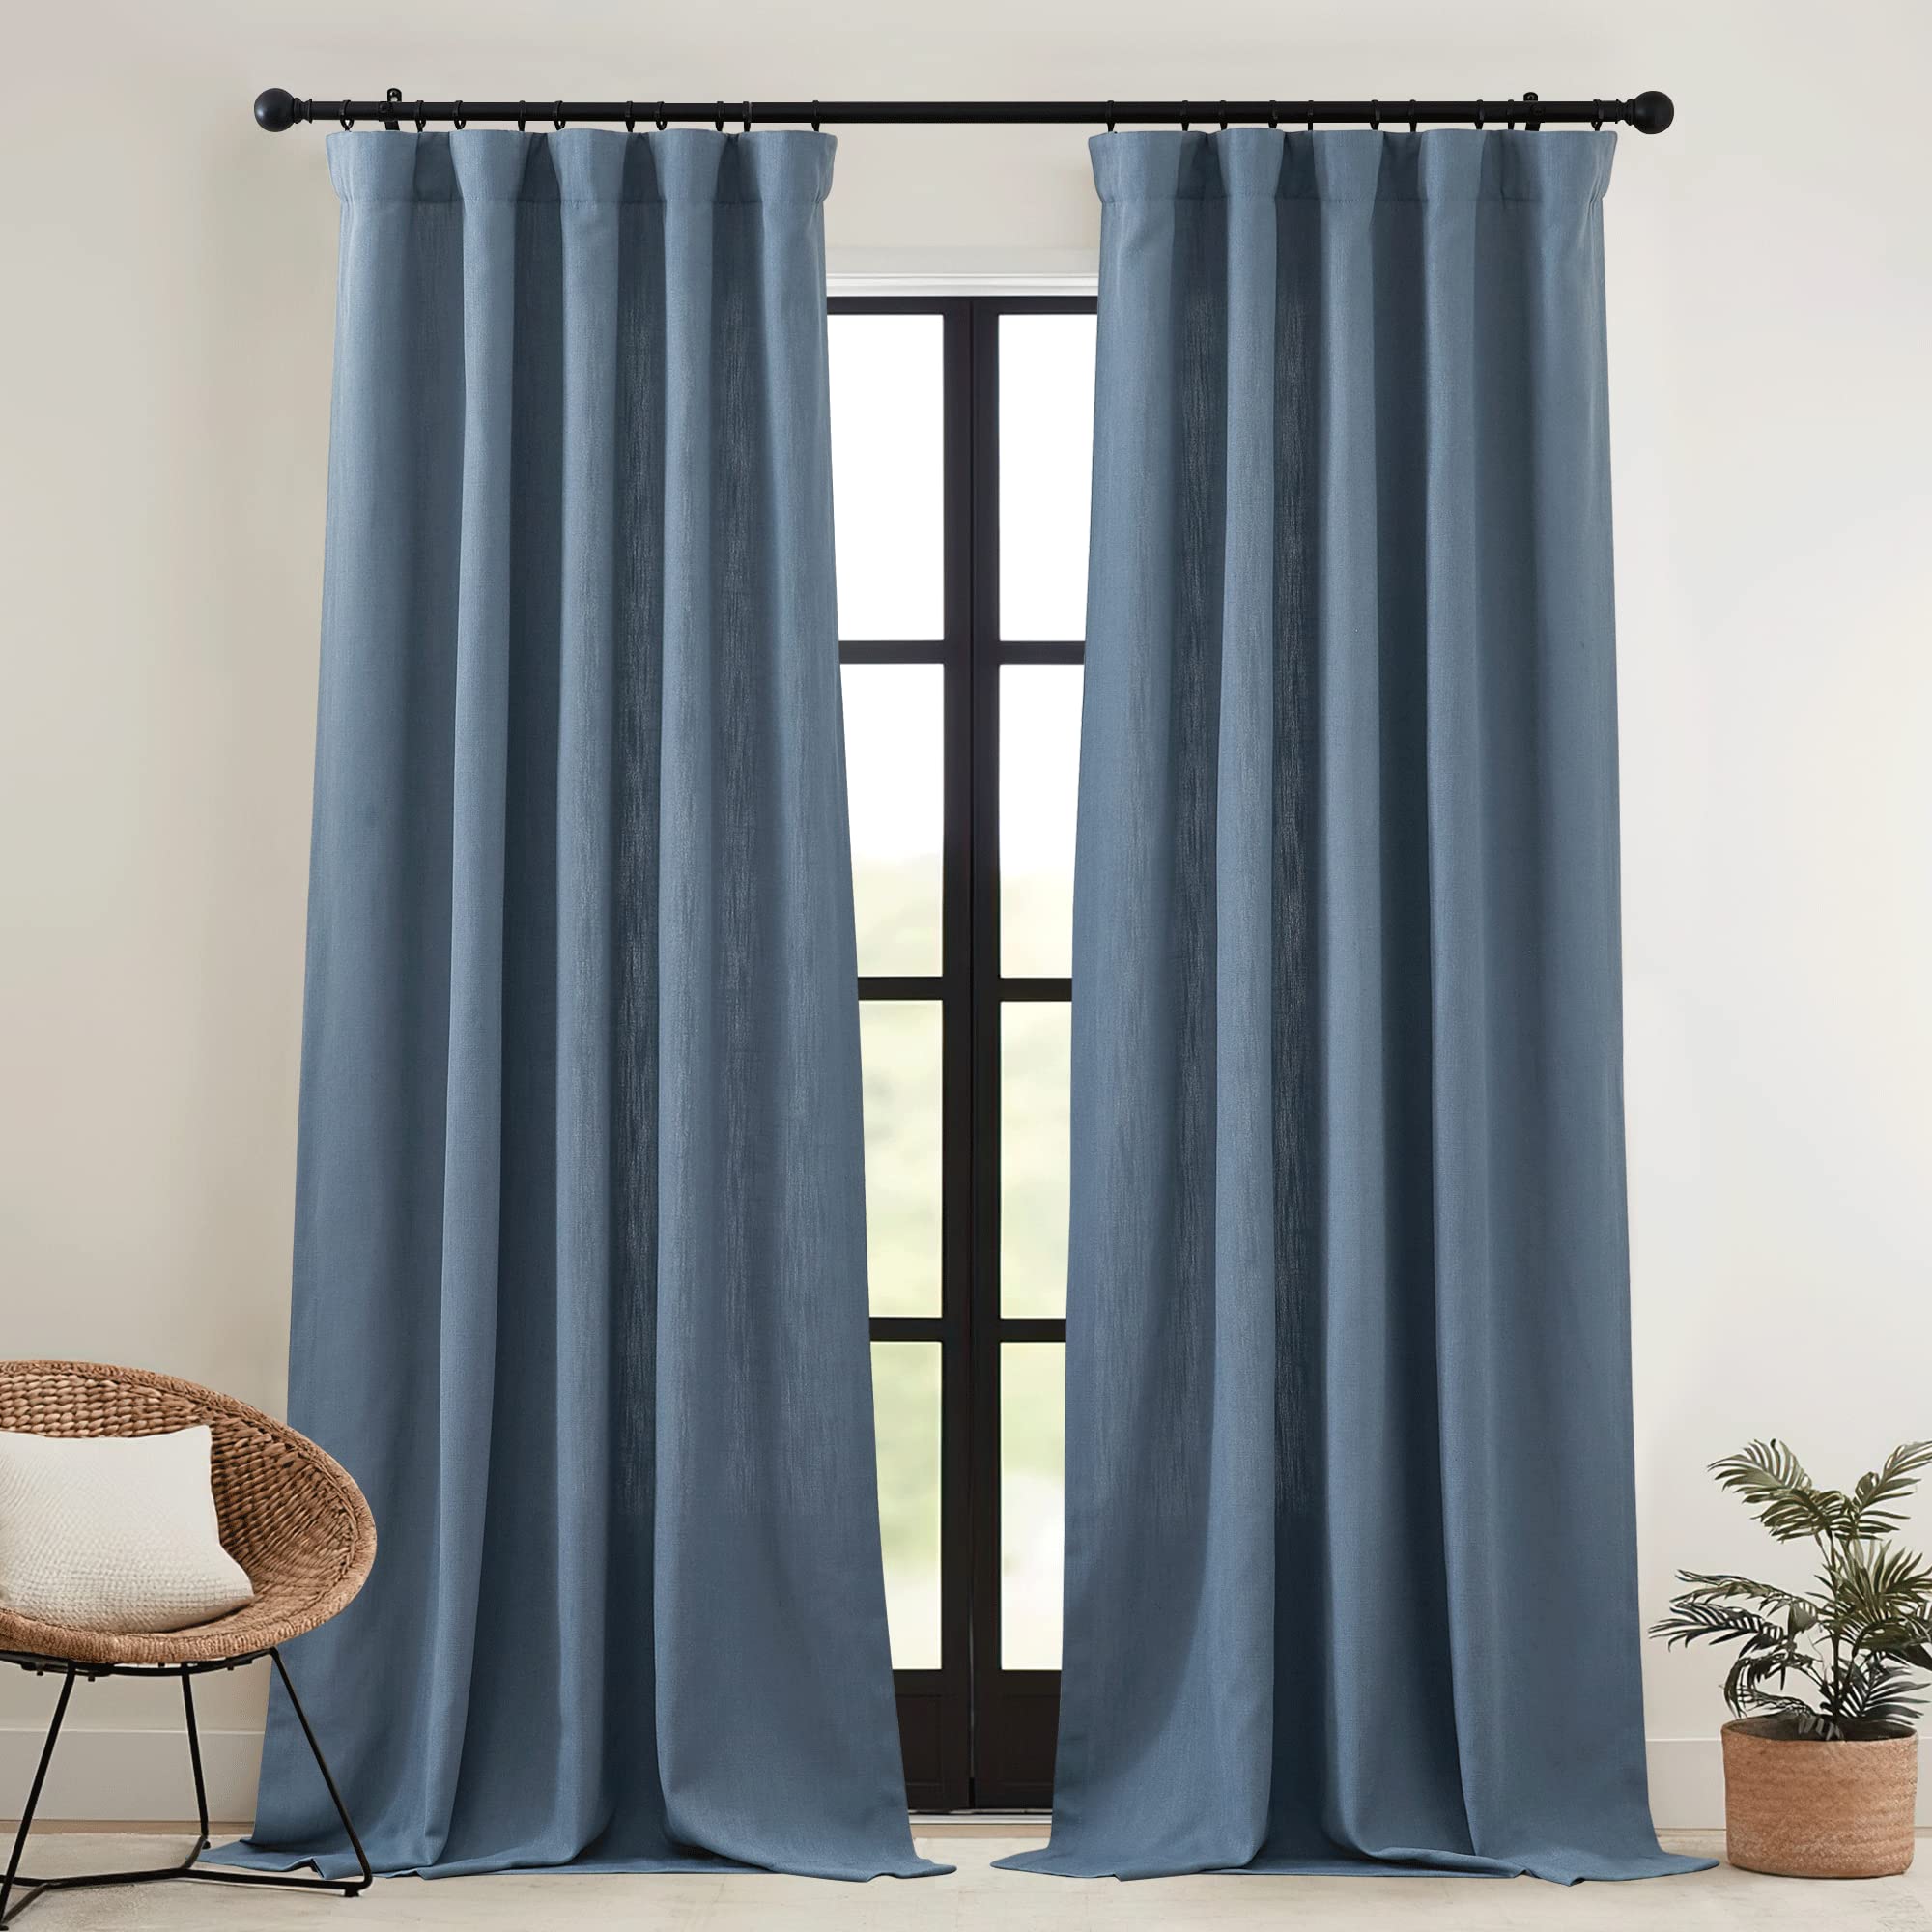 Blackout Curtains Room Darkening Window Curtains with Heavy Faux Linen 2 Panels